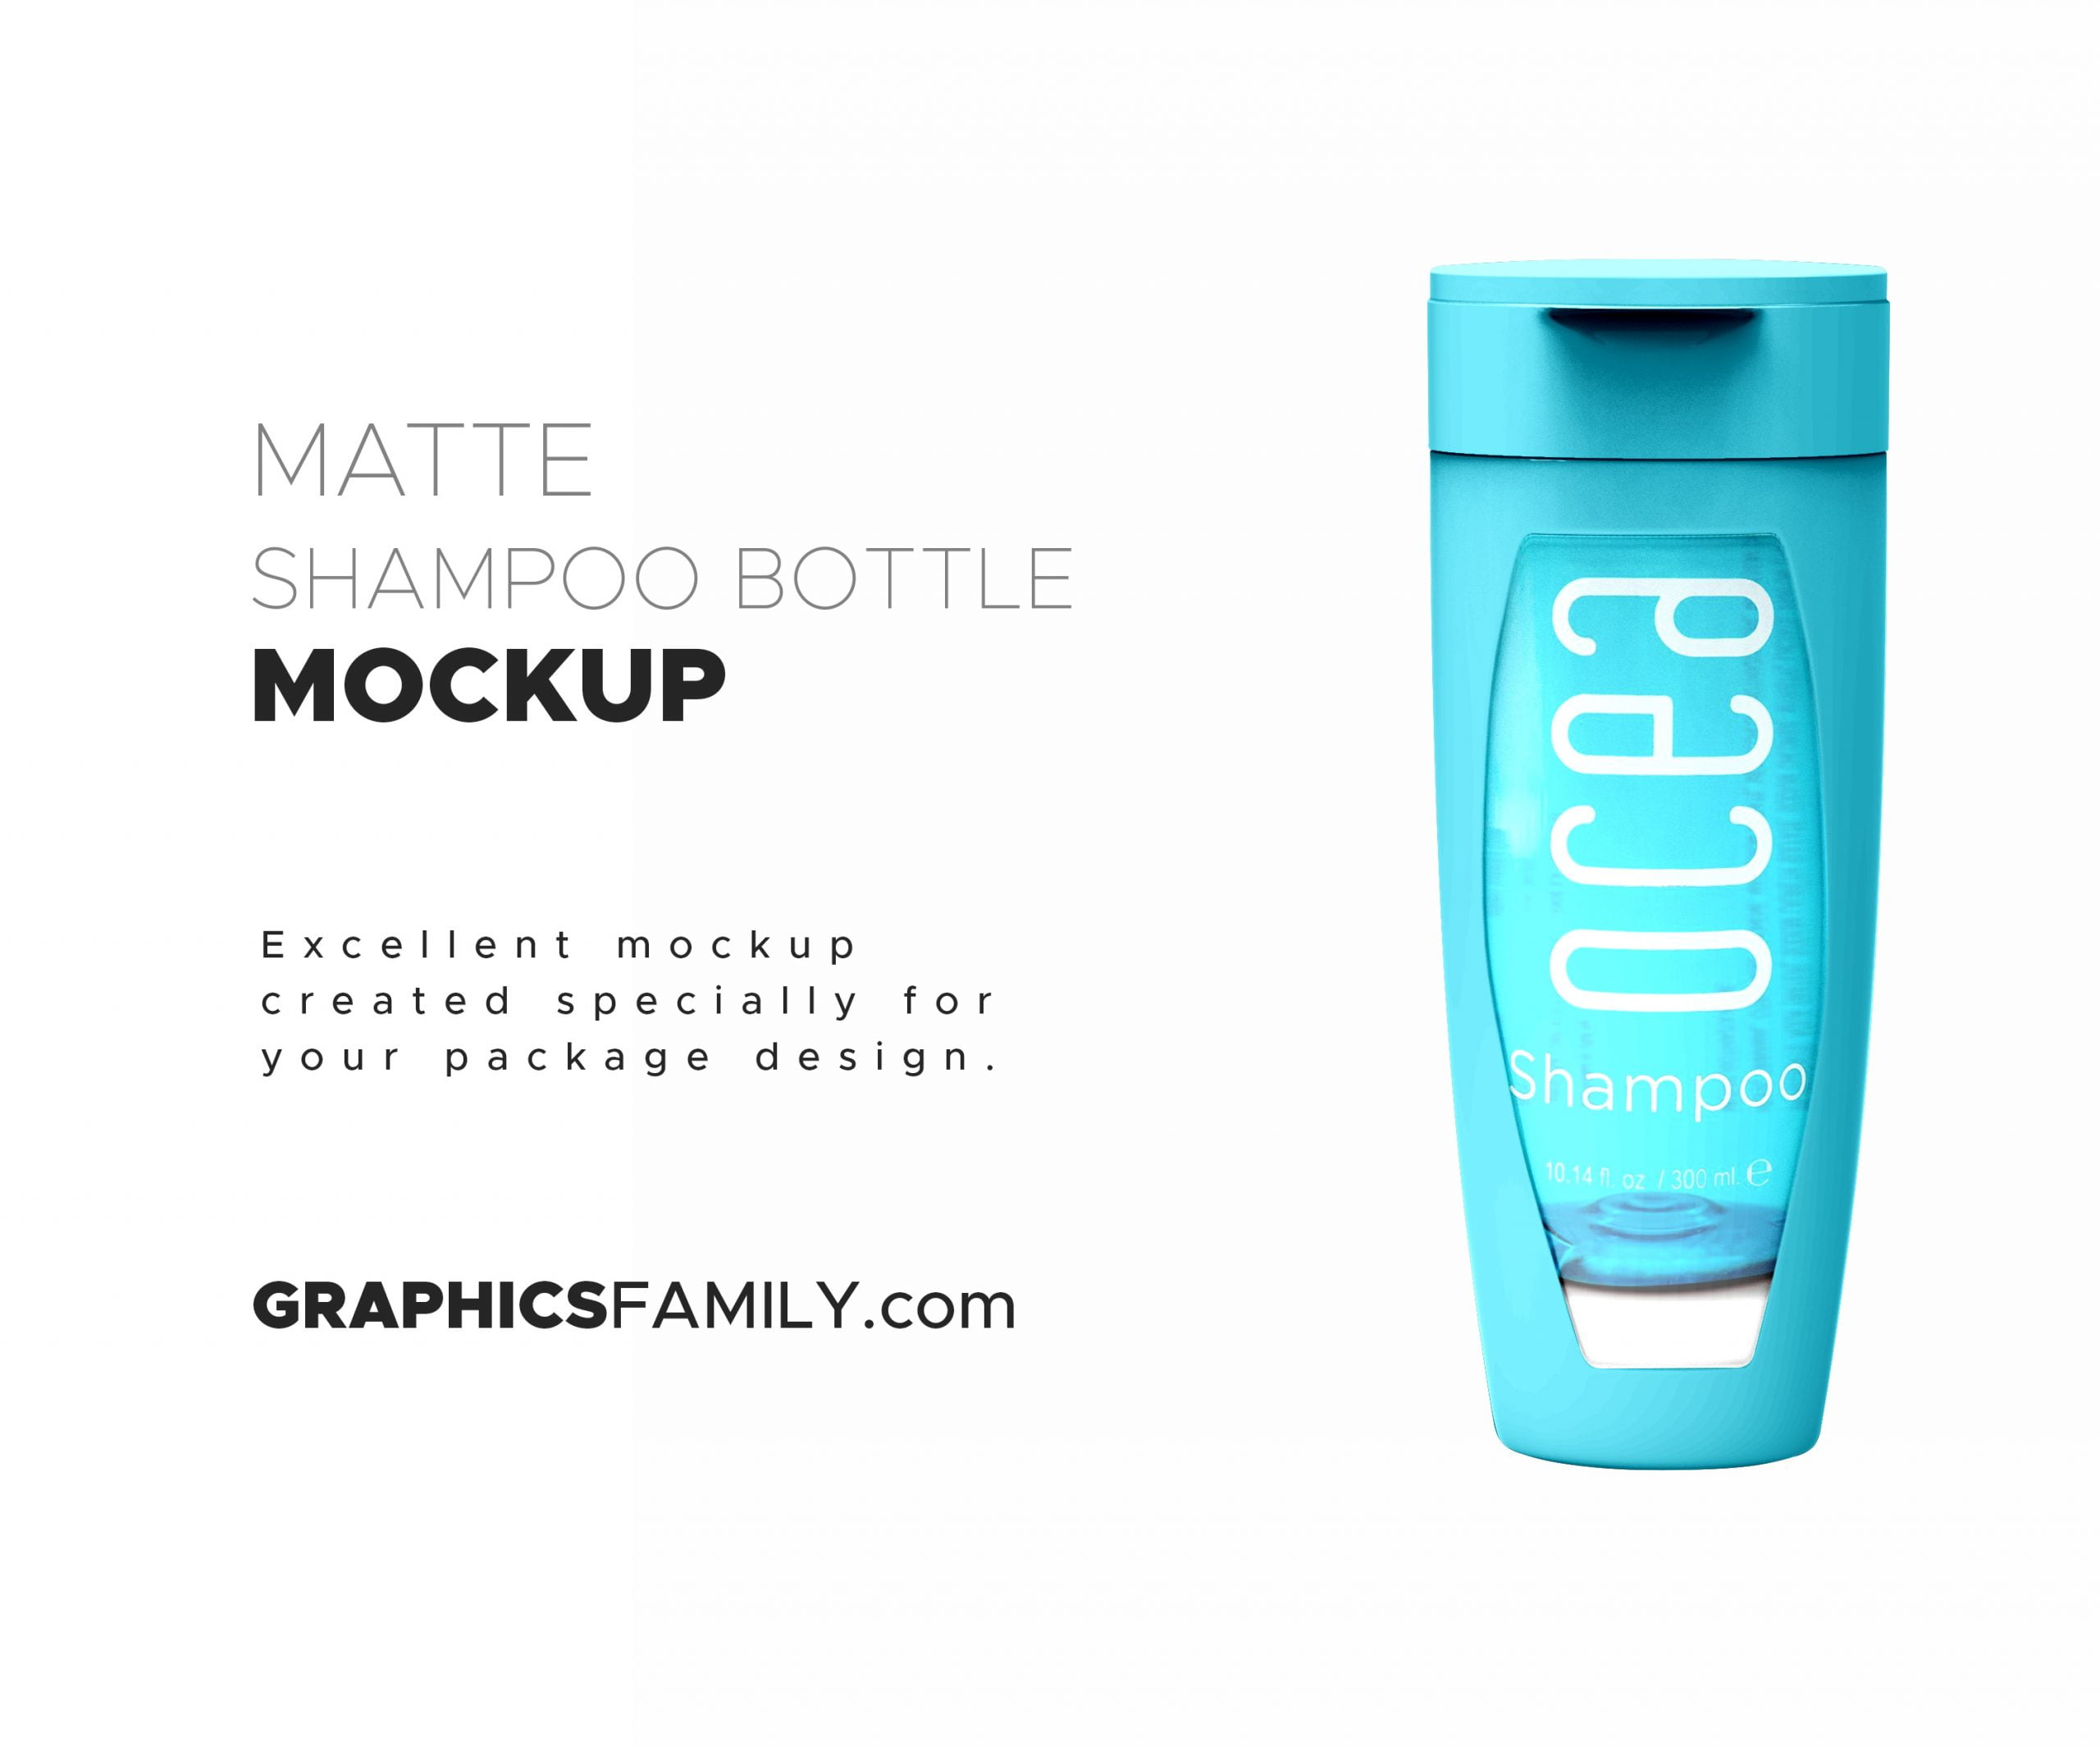 Download Matte Shampoo Bottle with Flip-Top Cap Mockup - GraphicsFamily